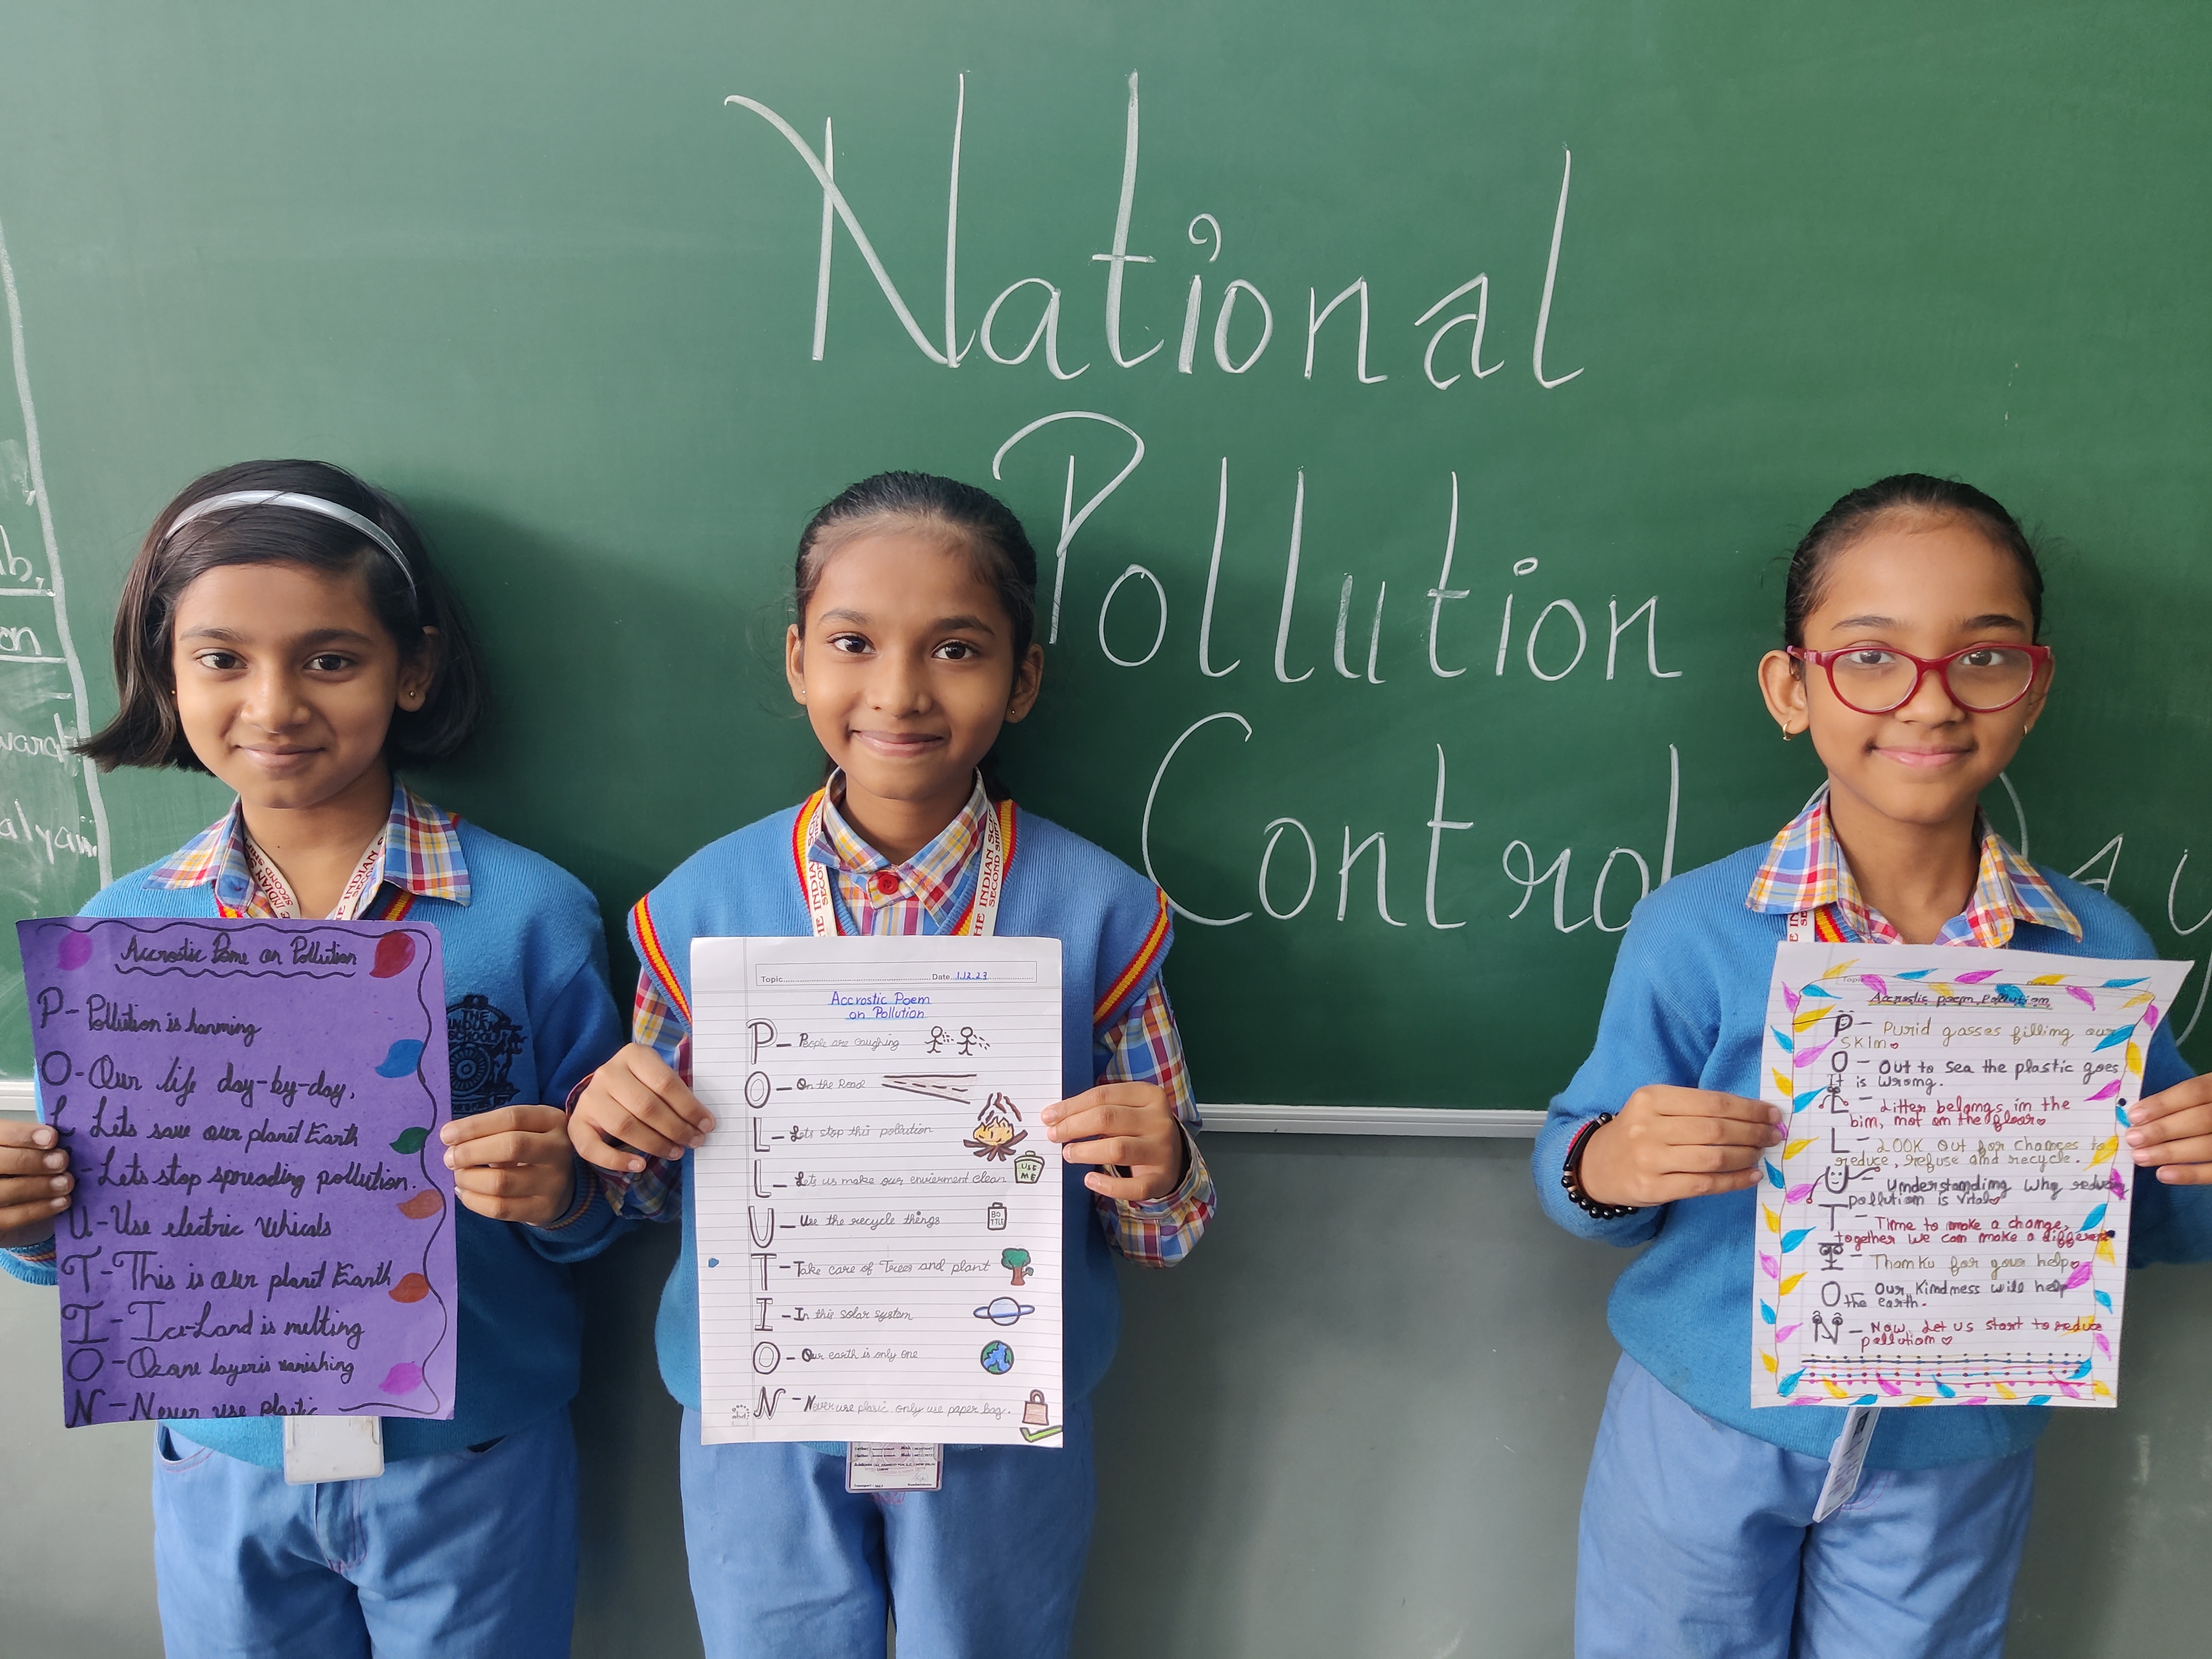 Classes 3-6 observe National Pollution Control Day